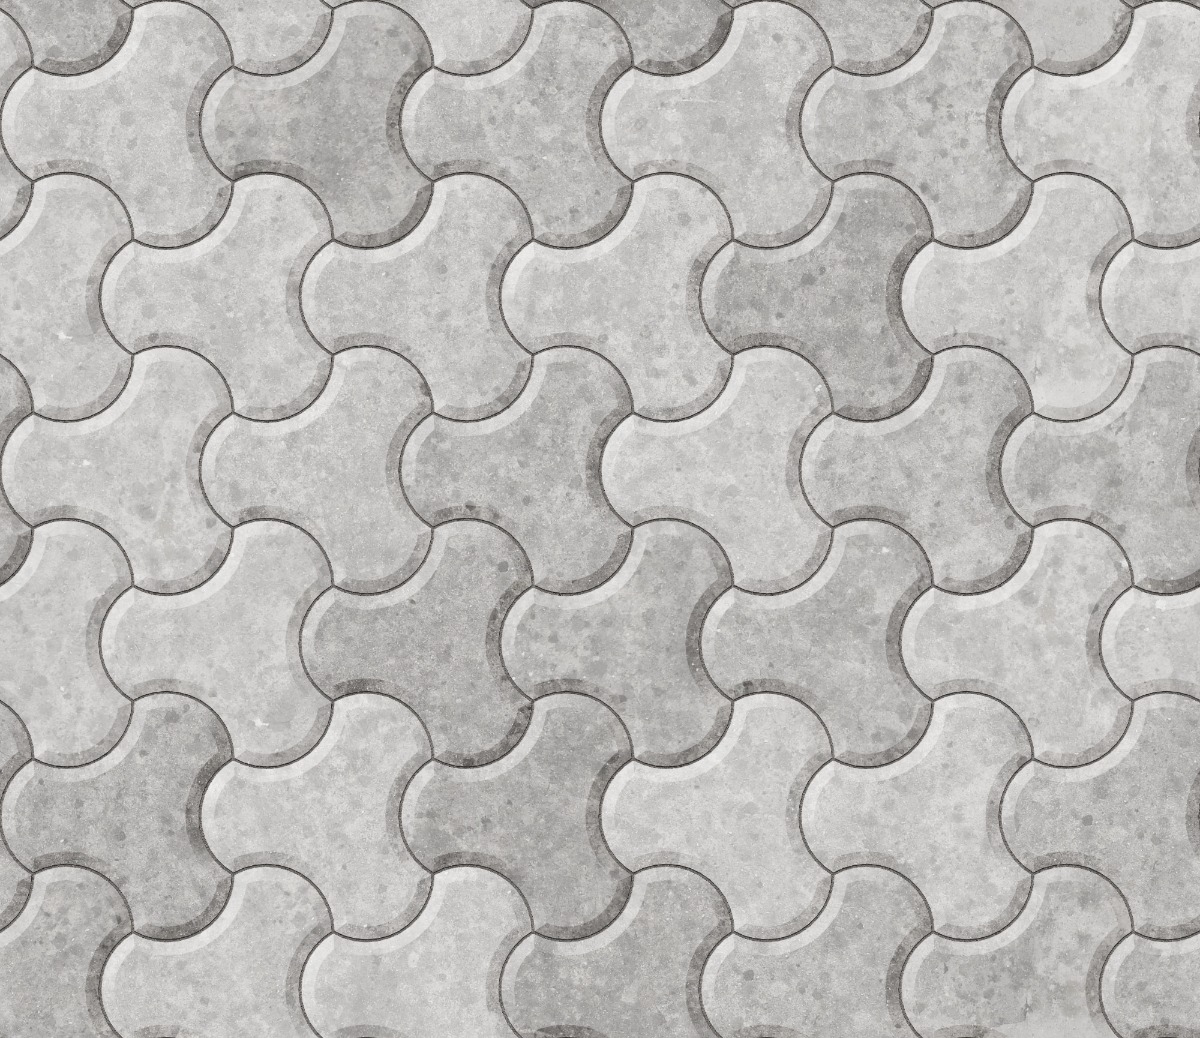 A seamless concrete texture with concrete blocks arranged in a Propeller Pavers pattern